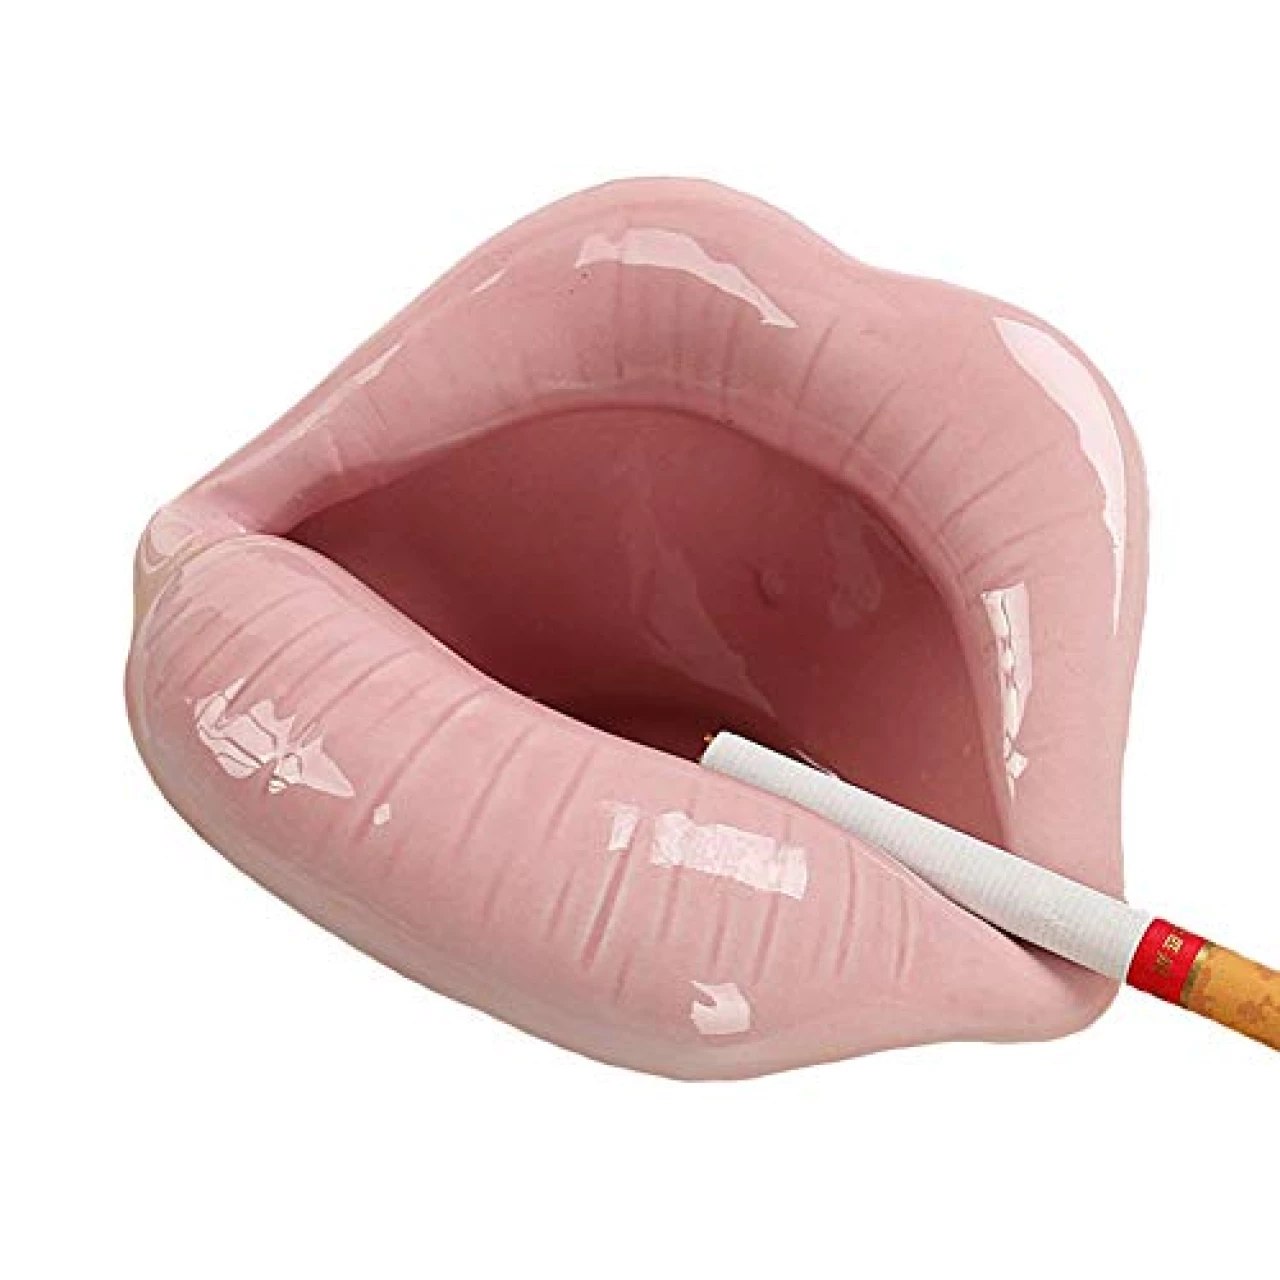 Wang-Data Creative Ceramic Cigarette Ashtrays with Lips Style Fashion Home Decorations (Pink)